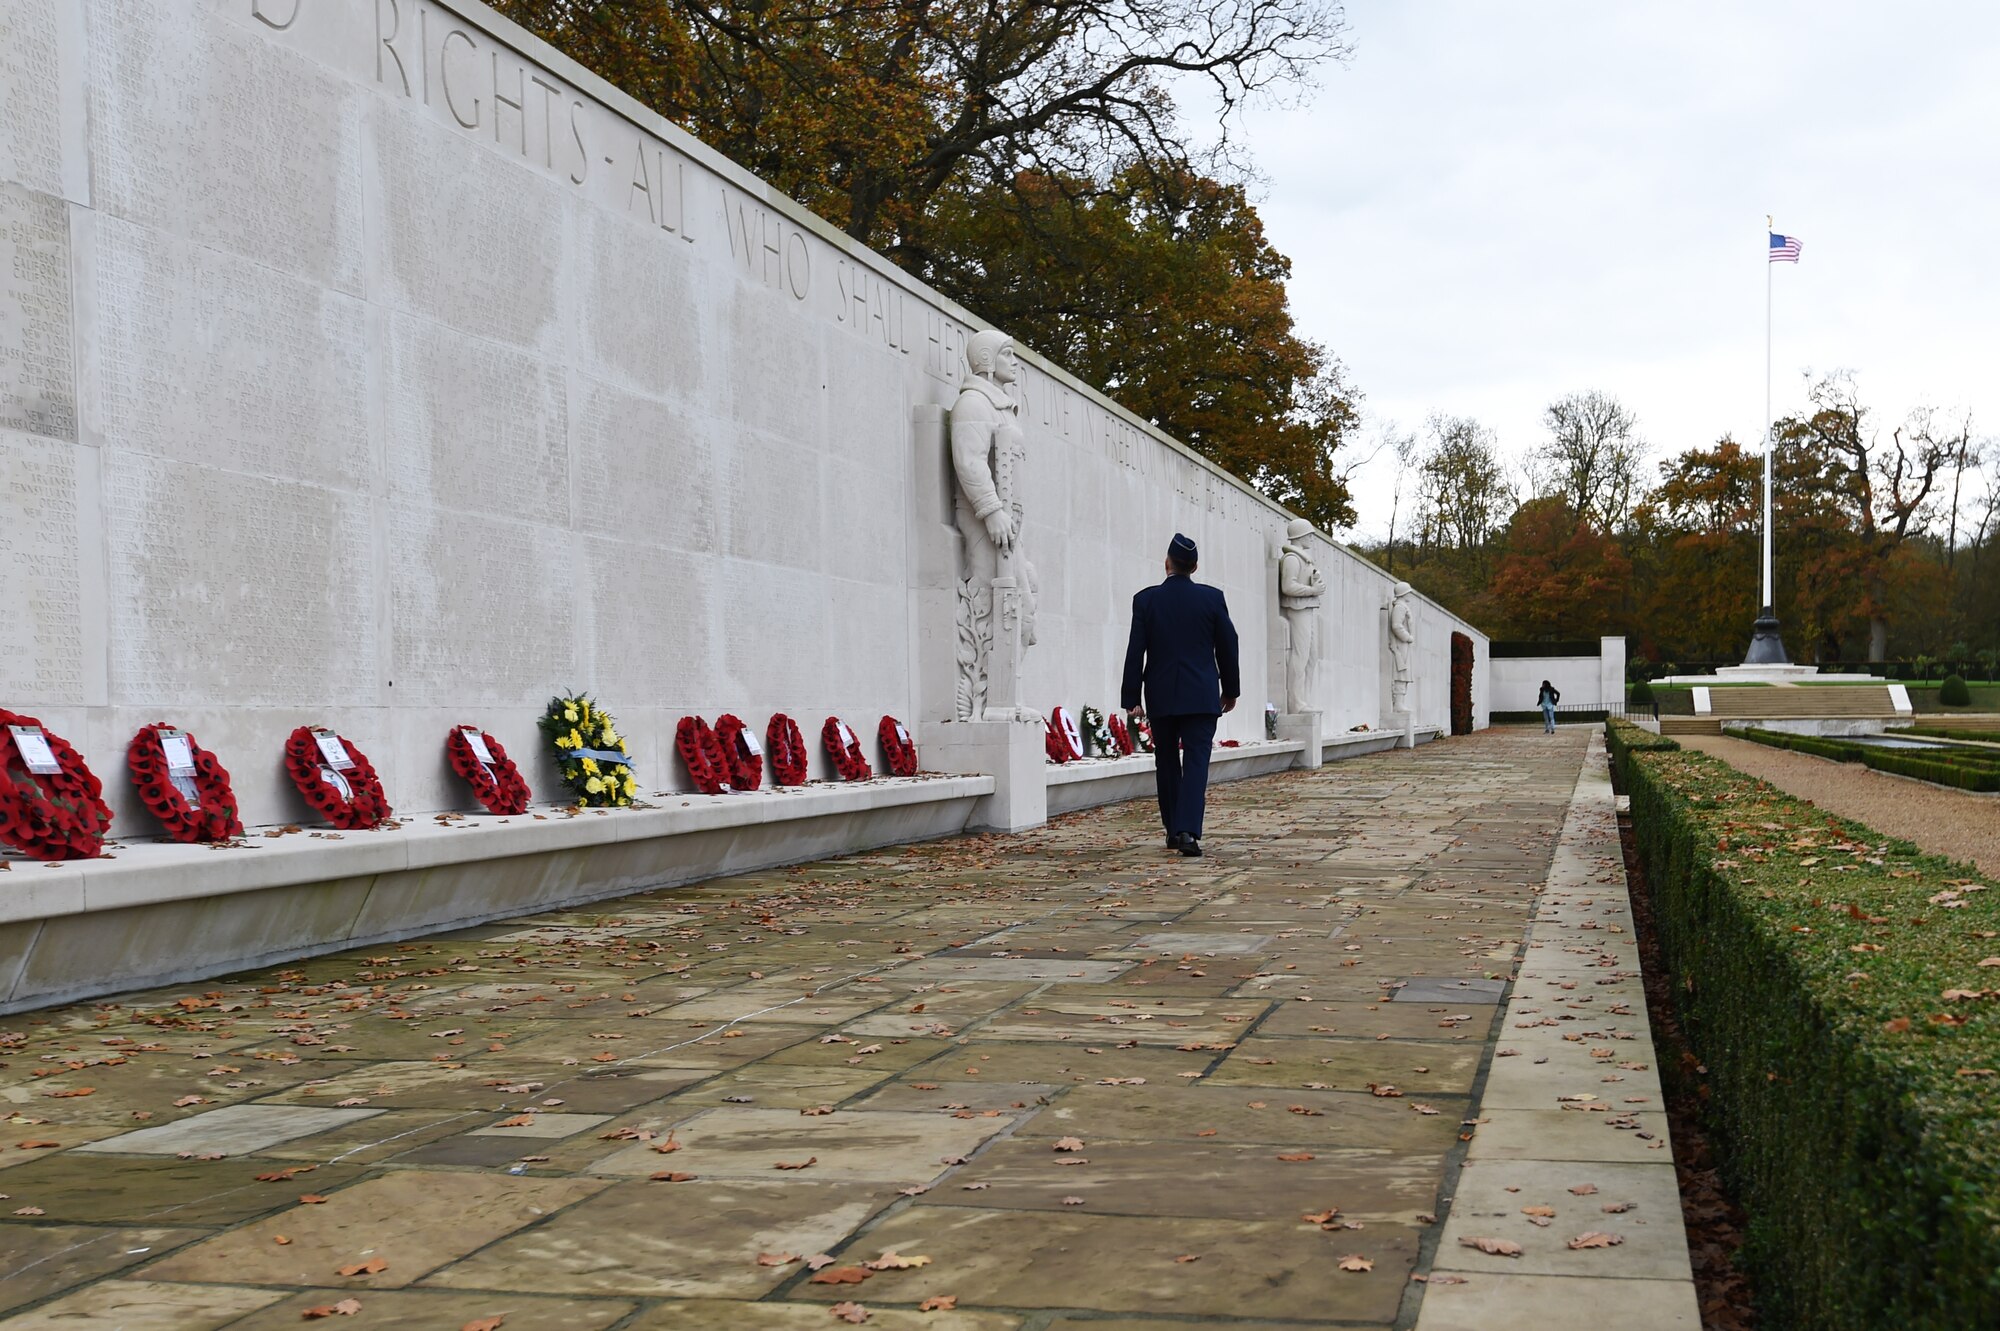 U.S. Air Force Lt. Gen. Timothy Ray, 3rd Air Force and 17th Expeditionary Air Force commander, walks alongside the Tablets of the Missing following a Veterans Day ceremony at Cambridge American Cemetery, United Kingdom, Nov. 11, 2015. The Tablets of the Missing is a stone wall engraved with the names of 5,127 Americans who were declared missing in action during World War II. (U.S. Air Force photo by Staff Sgt. Jarad A. Denton/Released)